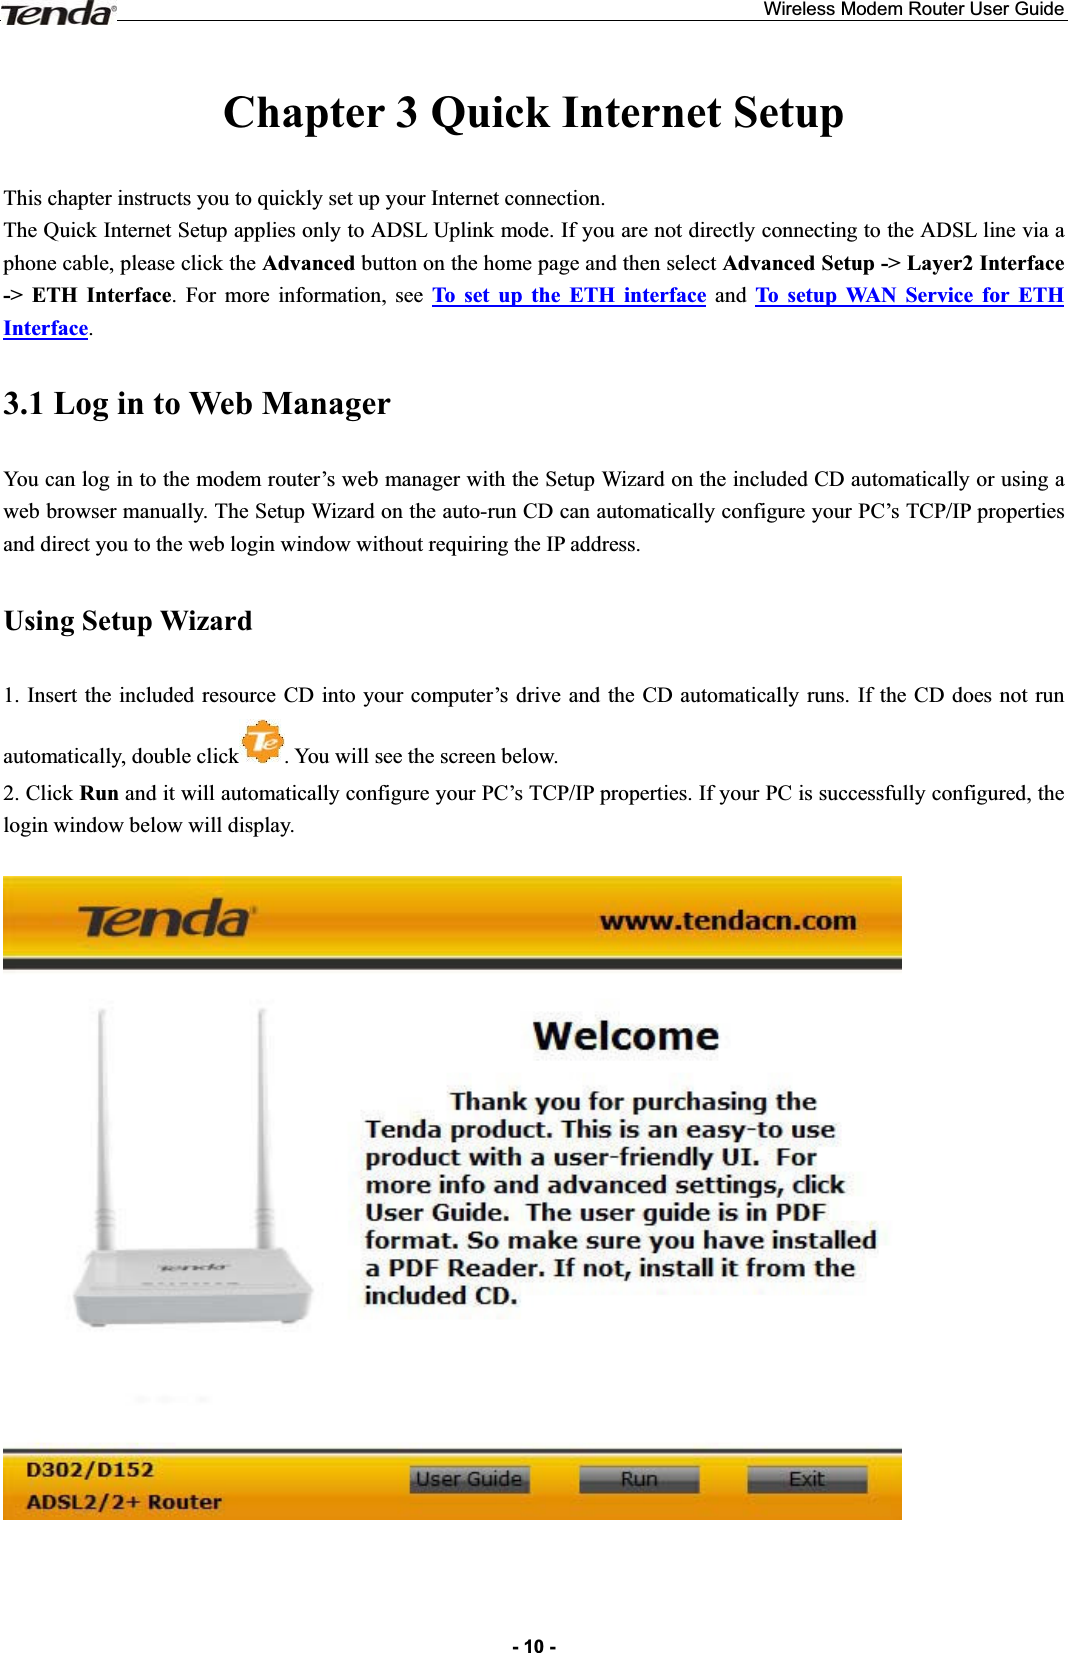 Wireless Modem Router User Guide- 10 -Chapter 3 Quick Internet Setup This chapter instructs you to quickly set up your Internet connection.The Quick Internet Setup applies only to ADSL Uplink mode. If you are not directly connecting to the ADSL line via a phone cable, please click the Advanced button on the home page and then select Advanced Setup -&gt; Layer2 Interface -&gt; ETH Interface. For more information, see To set up the ETH interface and To setup WAN Service for ETH Interface.3.1 Log in to Web Manager You can log in to the modem router’s web manager with the Setup Wizard on the included CD automatically or using a web browser manually. The Setup Wizard on the auto-run CD can automatically configure your PC’s TCP/IP properties and direct you to the web login window without requiring the IP address. Using Setup Wizard 1. Insert the included resource CD into your computer’s drive and the CD automatically runs. If the CD does not run automatically, double click . You will see the screen below.     2. Click Run and it will automatically configure your PC’s TCP/IP properties. If your PC is successfully configured, the login window below will display. 